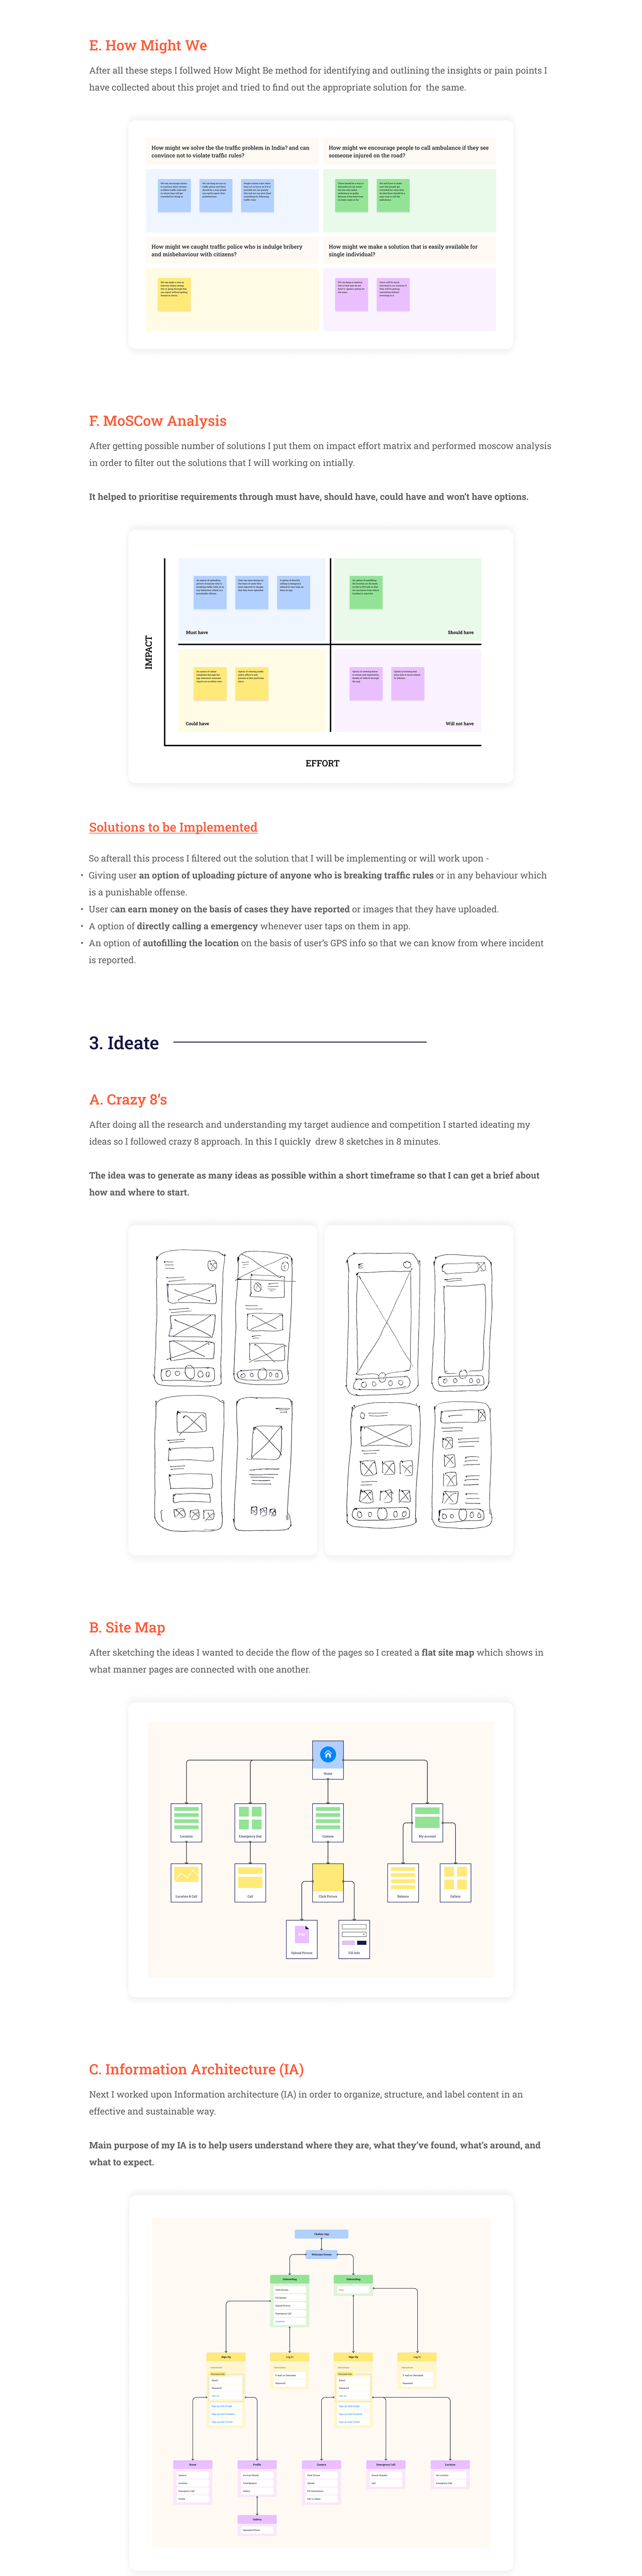 app Case Study color design traffic typography   UI user experience user interface ux